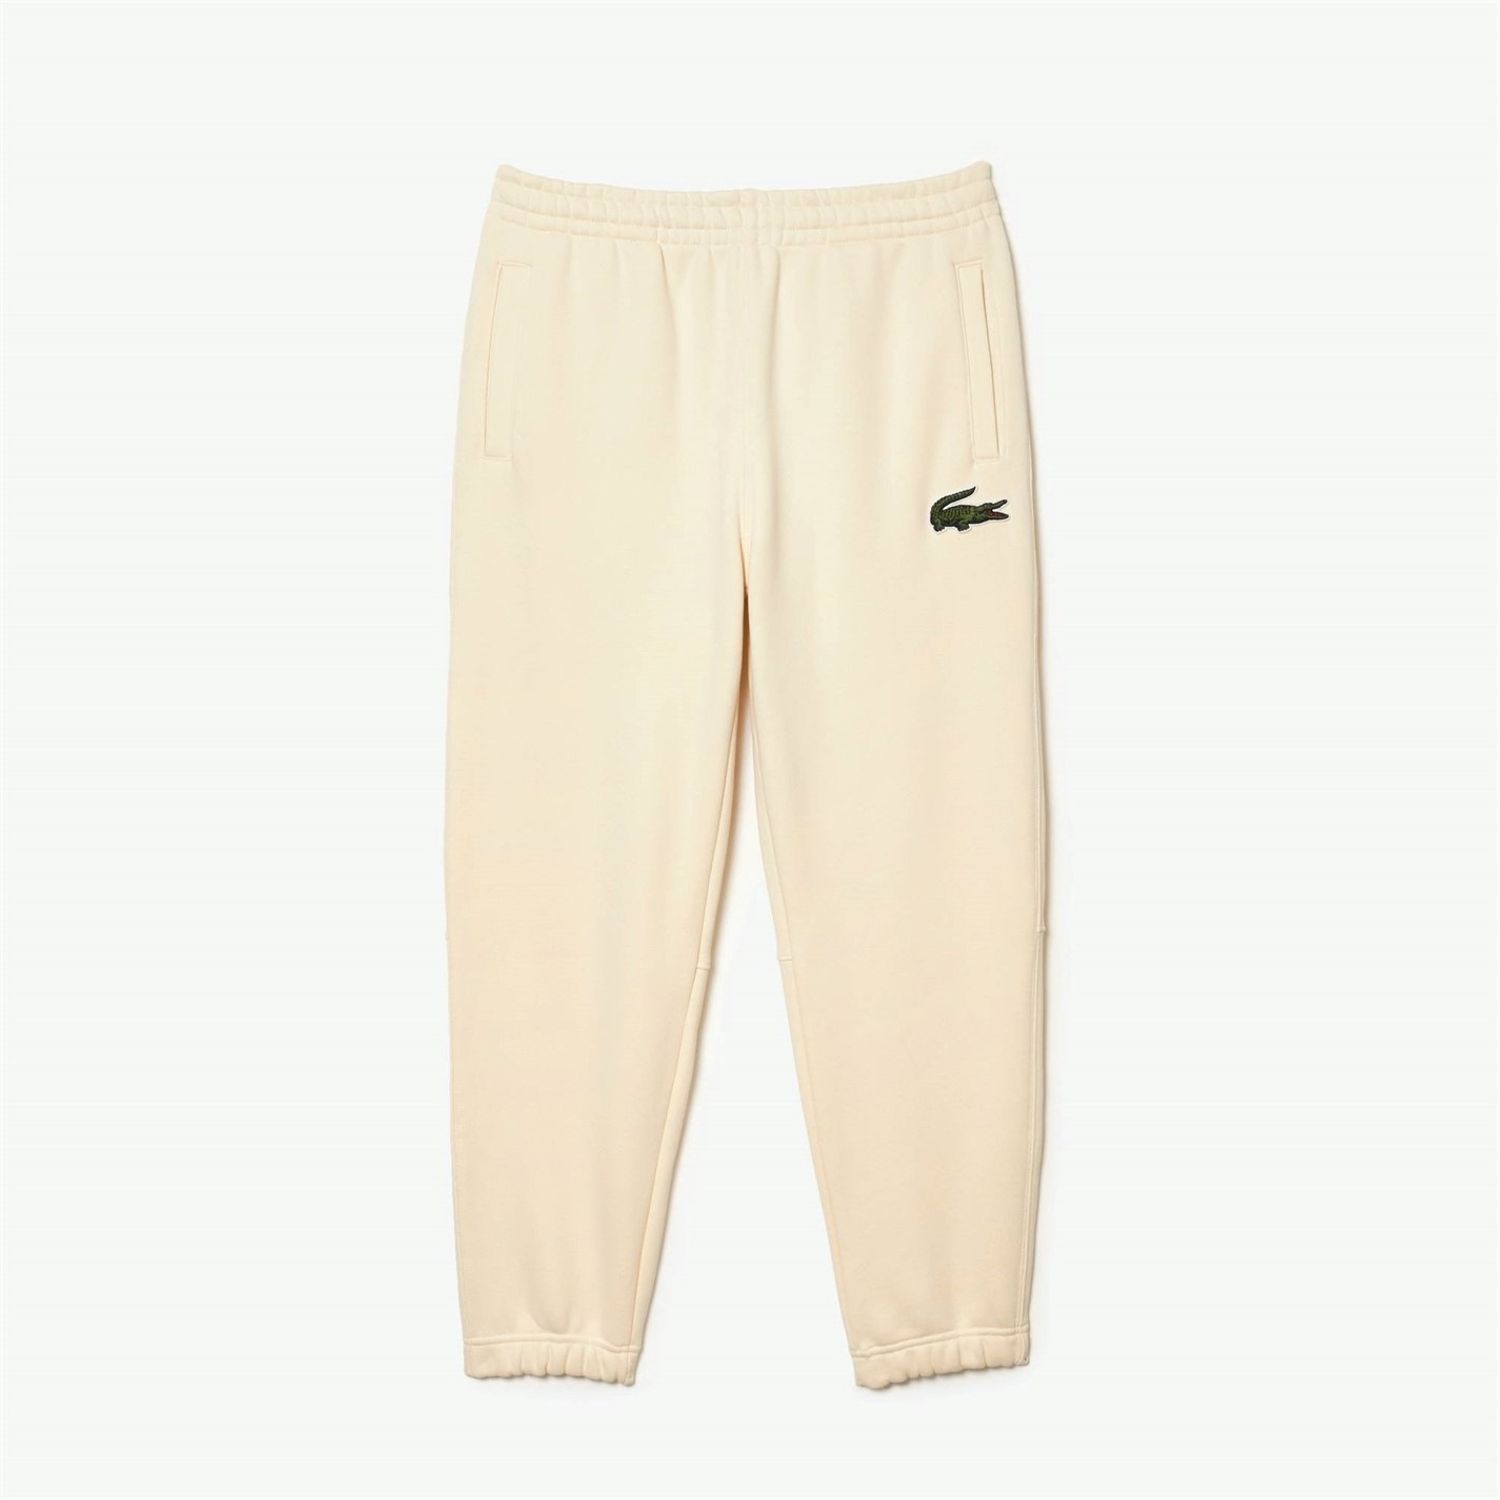 White Lacoste Jogging Bottoms - Get The Label